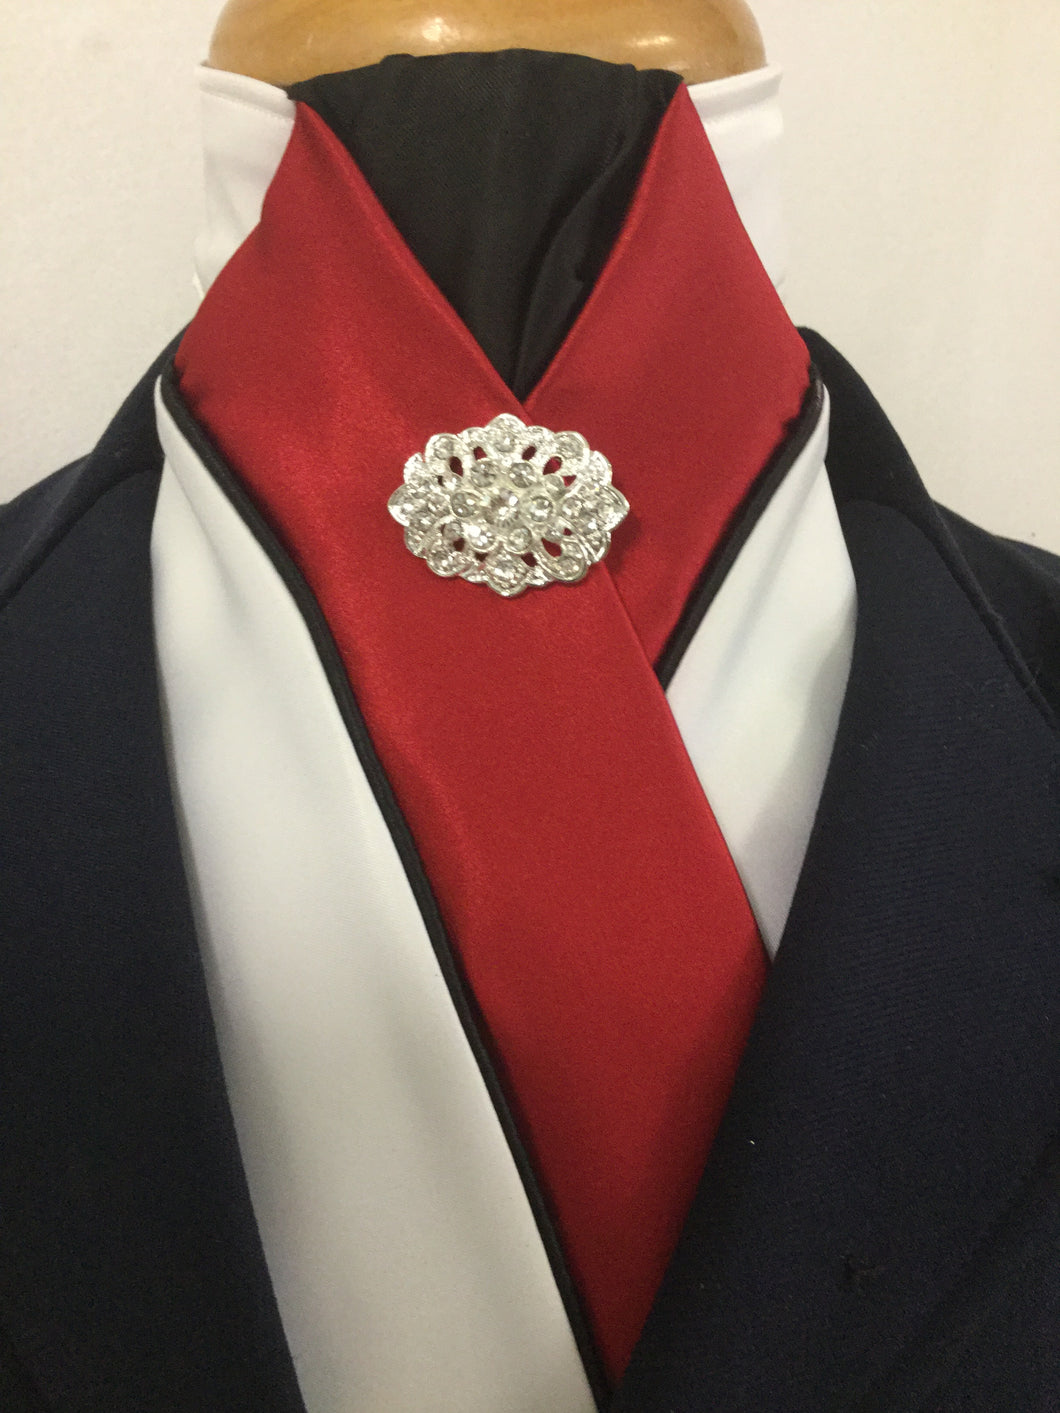 HHD 'The Royal' White Satin Pretied Dressage Stock Tie in Red & Black